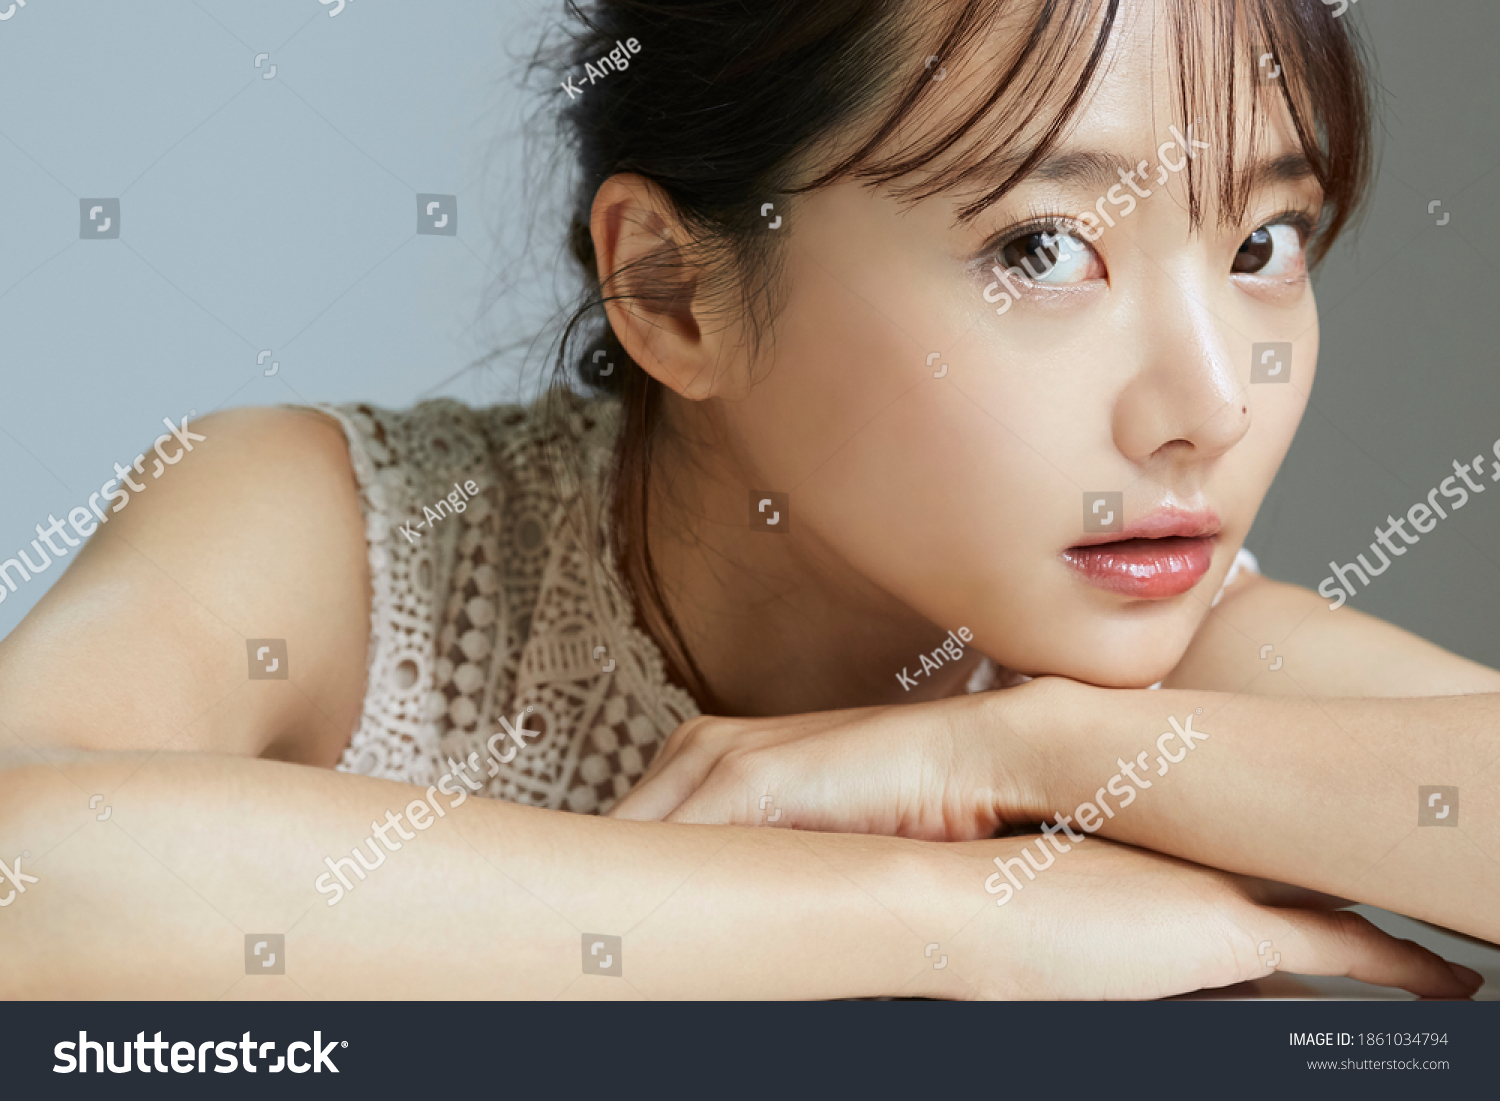 Natural beauty portrait of young Asian woman #1861034794